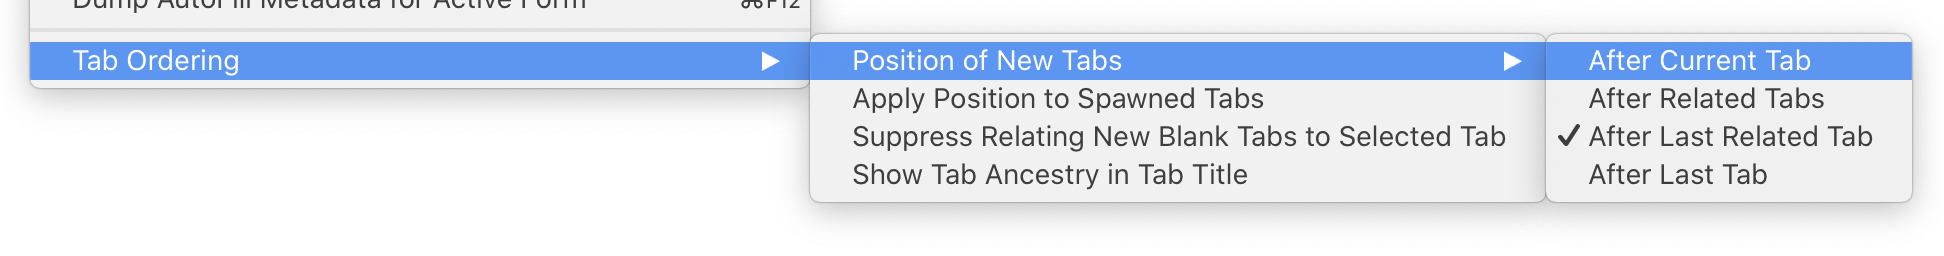 Tab Ordering > Position of New Tabs > After Current Tab